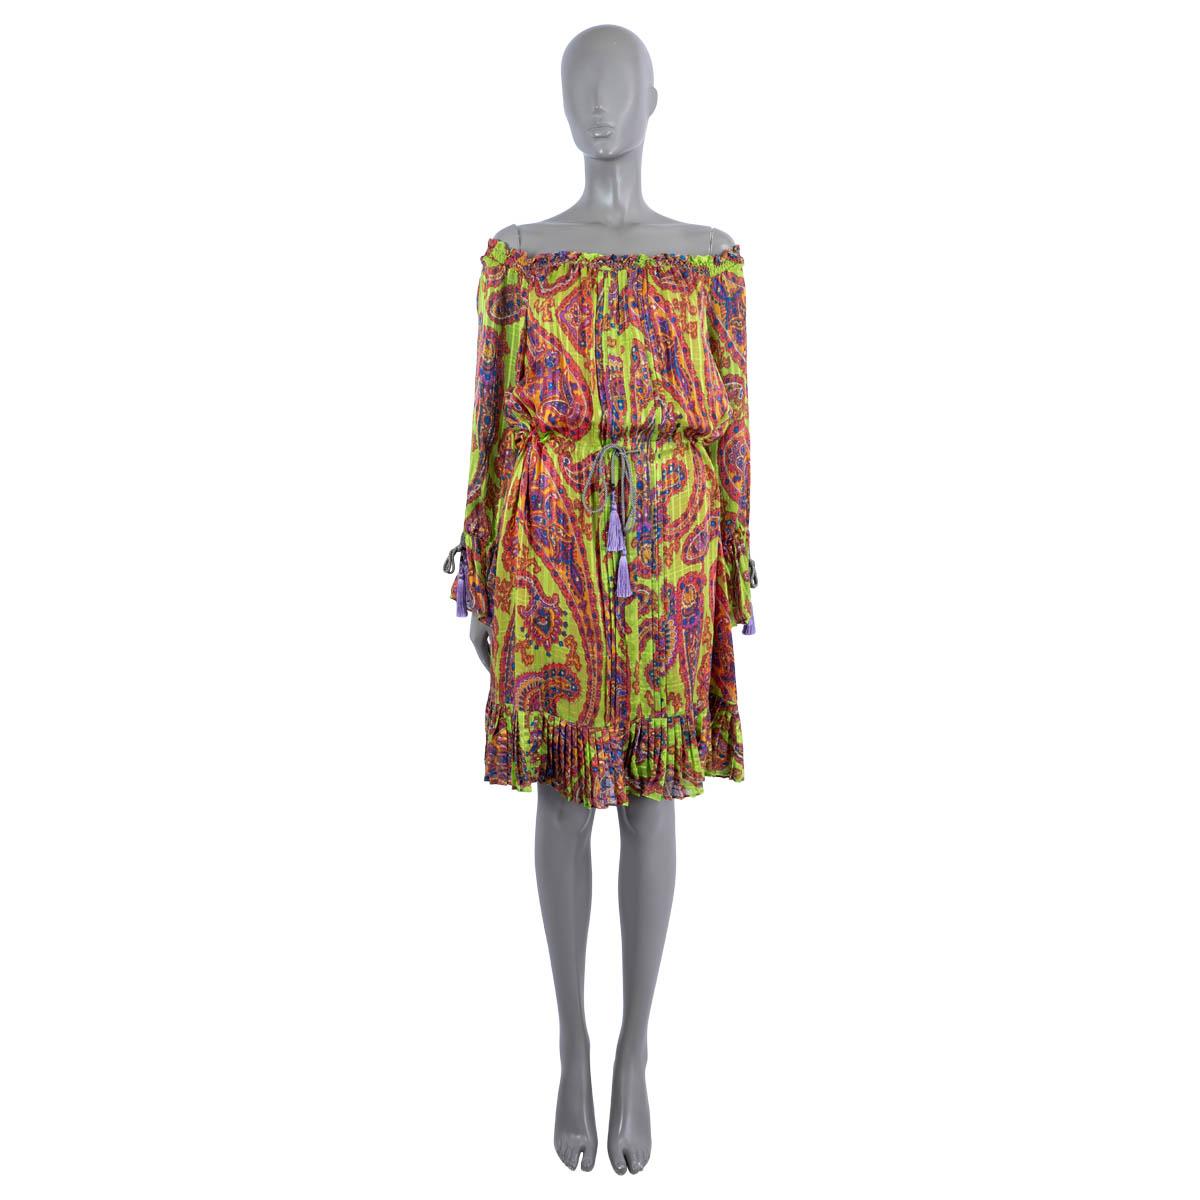 100% authentic Etro off-shoulder psychedelic print dress in neon, red, blue, purple and orange silk (100%) with tasseled ties at waist and cuffs. Lined in orange silk (100%). Has been worn and is in excellent condition.

Measurements
Tag